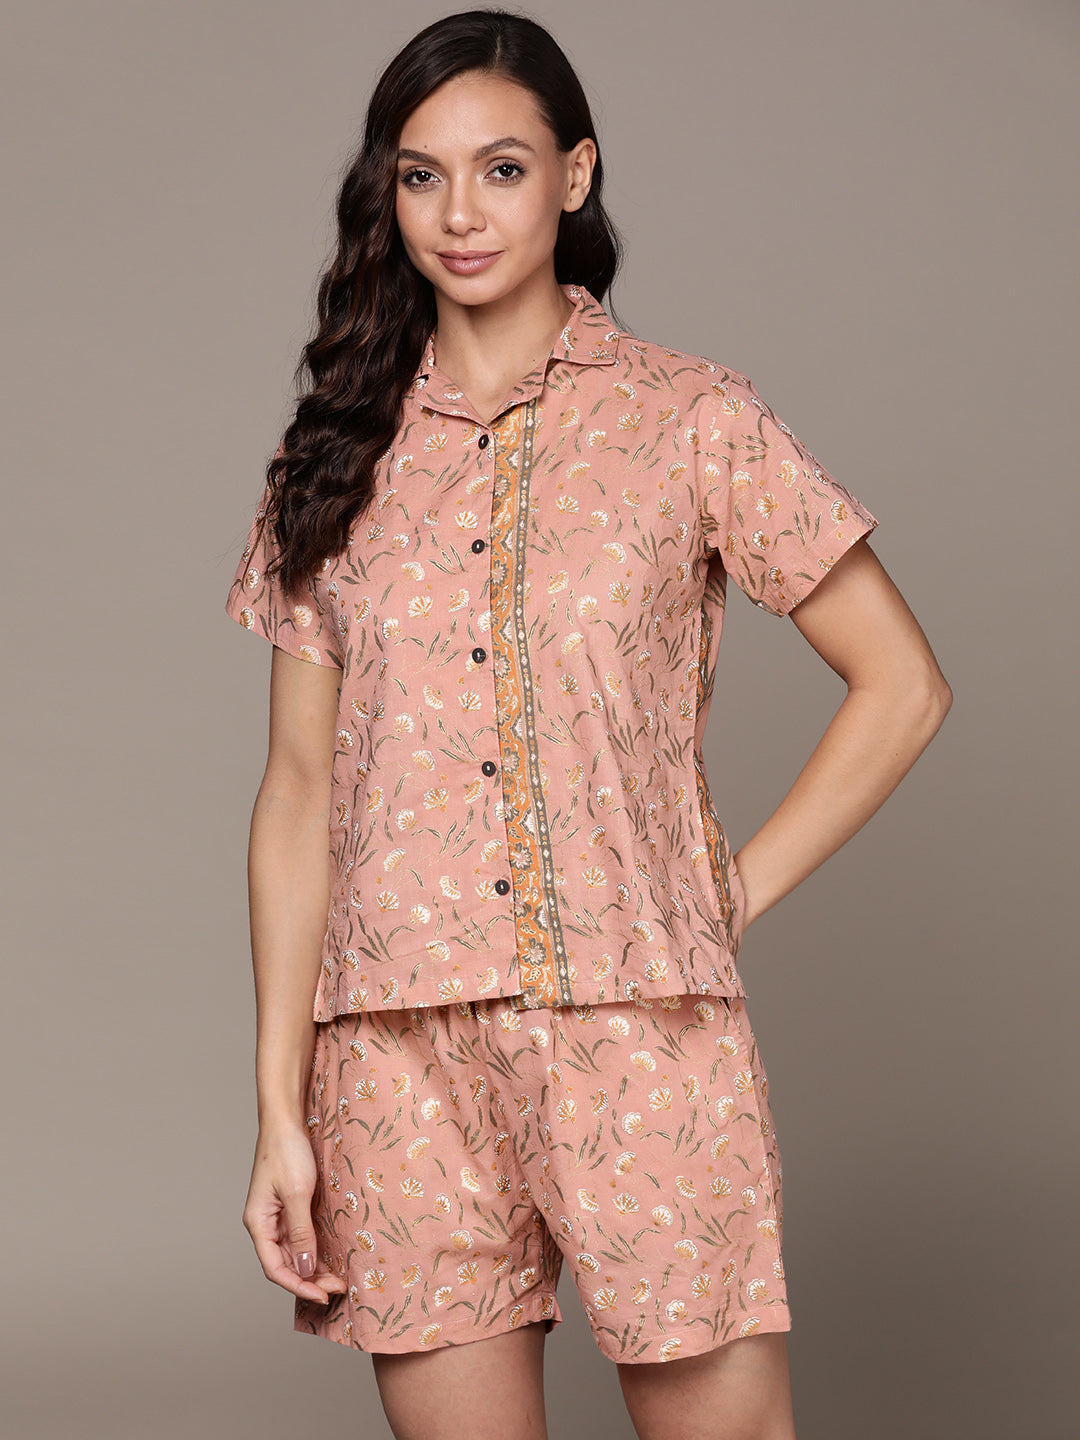 Women's's Peach Floral Gold Printed Pure Cotton Night Suit